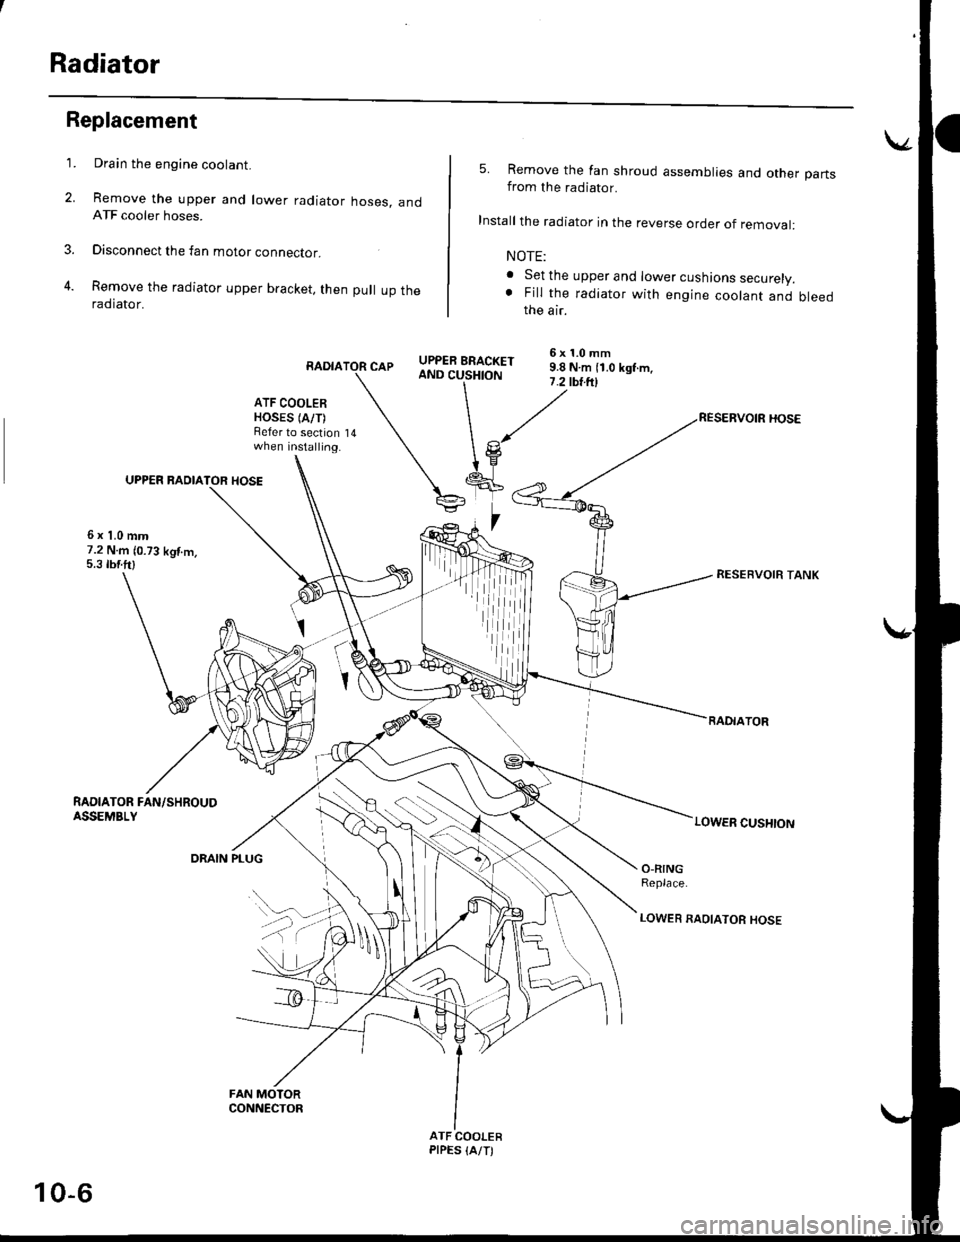 HONDA CIVIC 1998 6.G Workshop Manual Radiator
Replacement
Drain the engine coolant.
Remove the upper and lower radiator hoses, andATF cooler hoses.
Disconnect the fan motor connector.
Remove the radiator upper bracket, then pull up thera